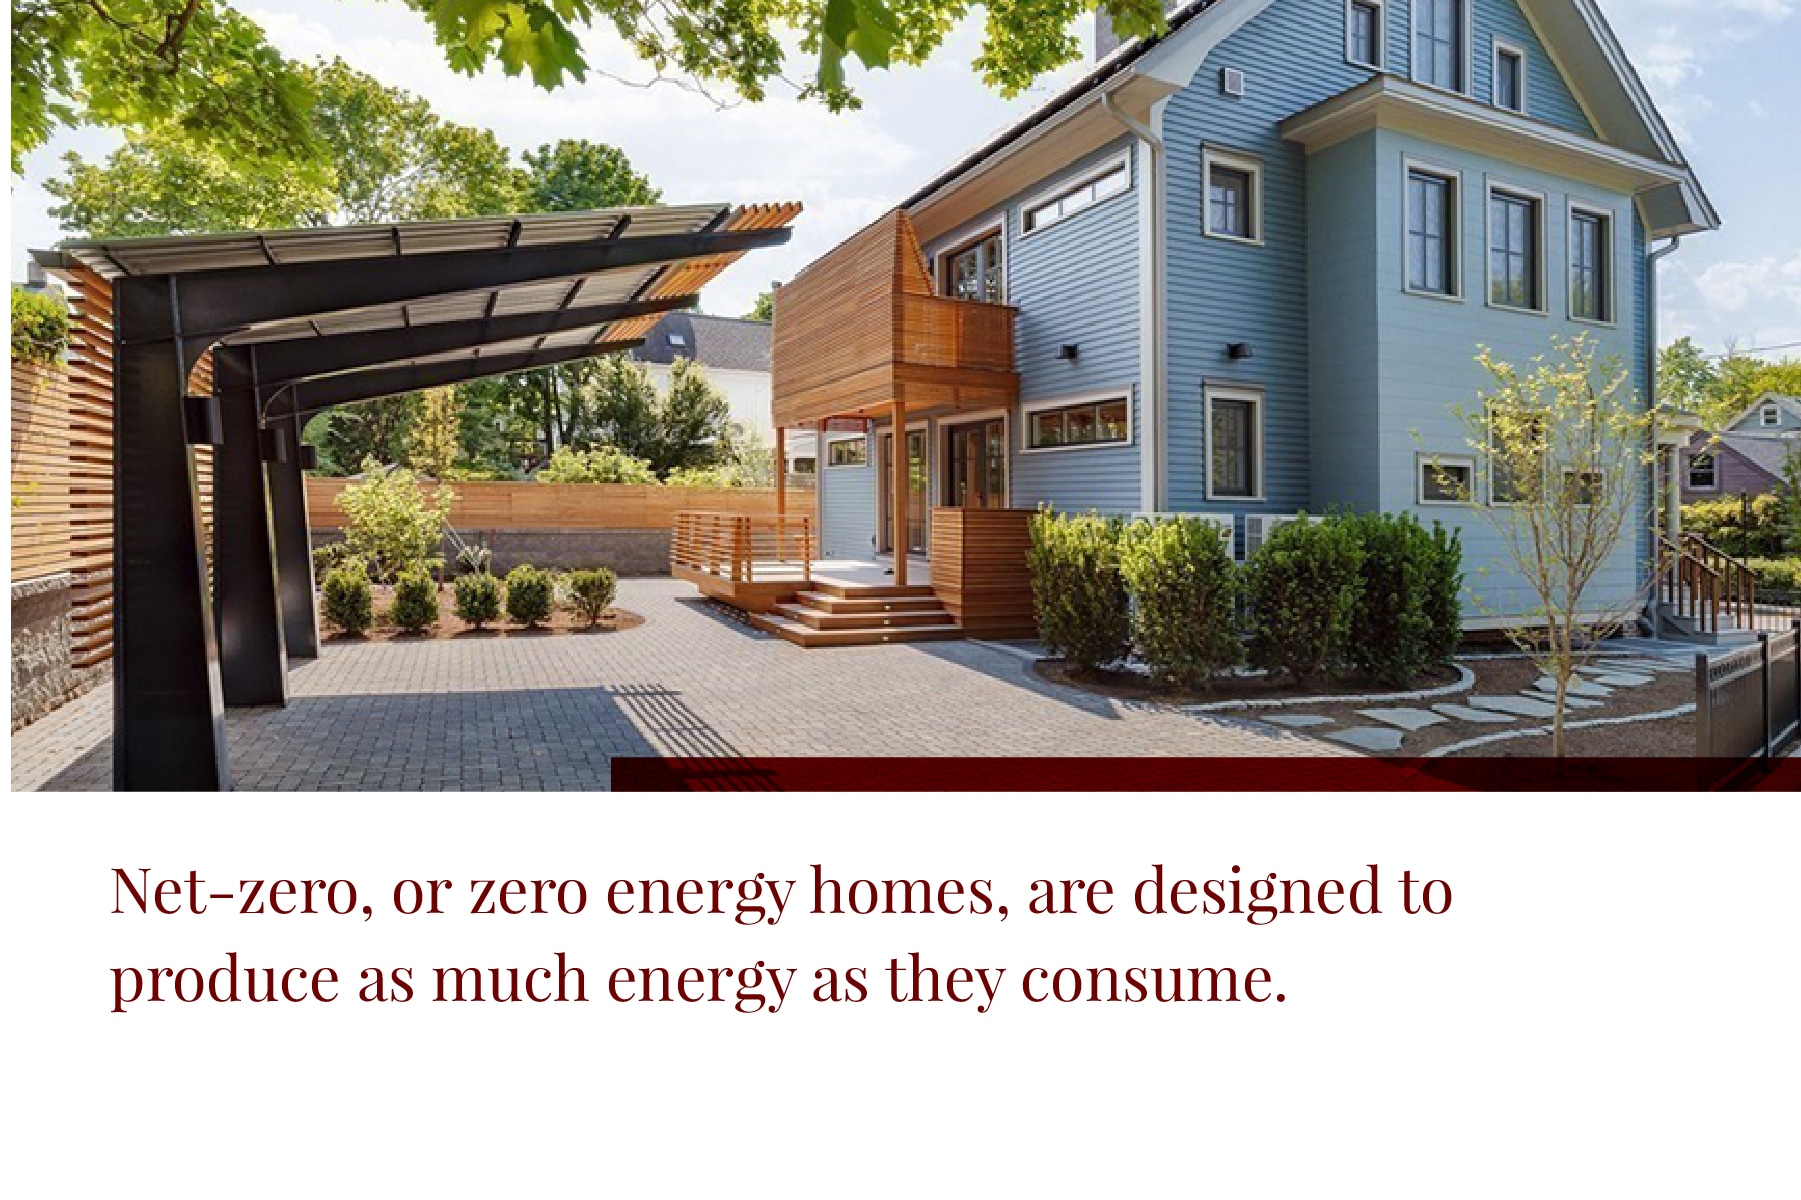 net zero homes produce as much energy as they consume